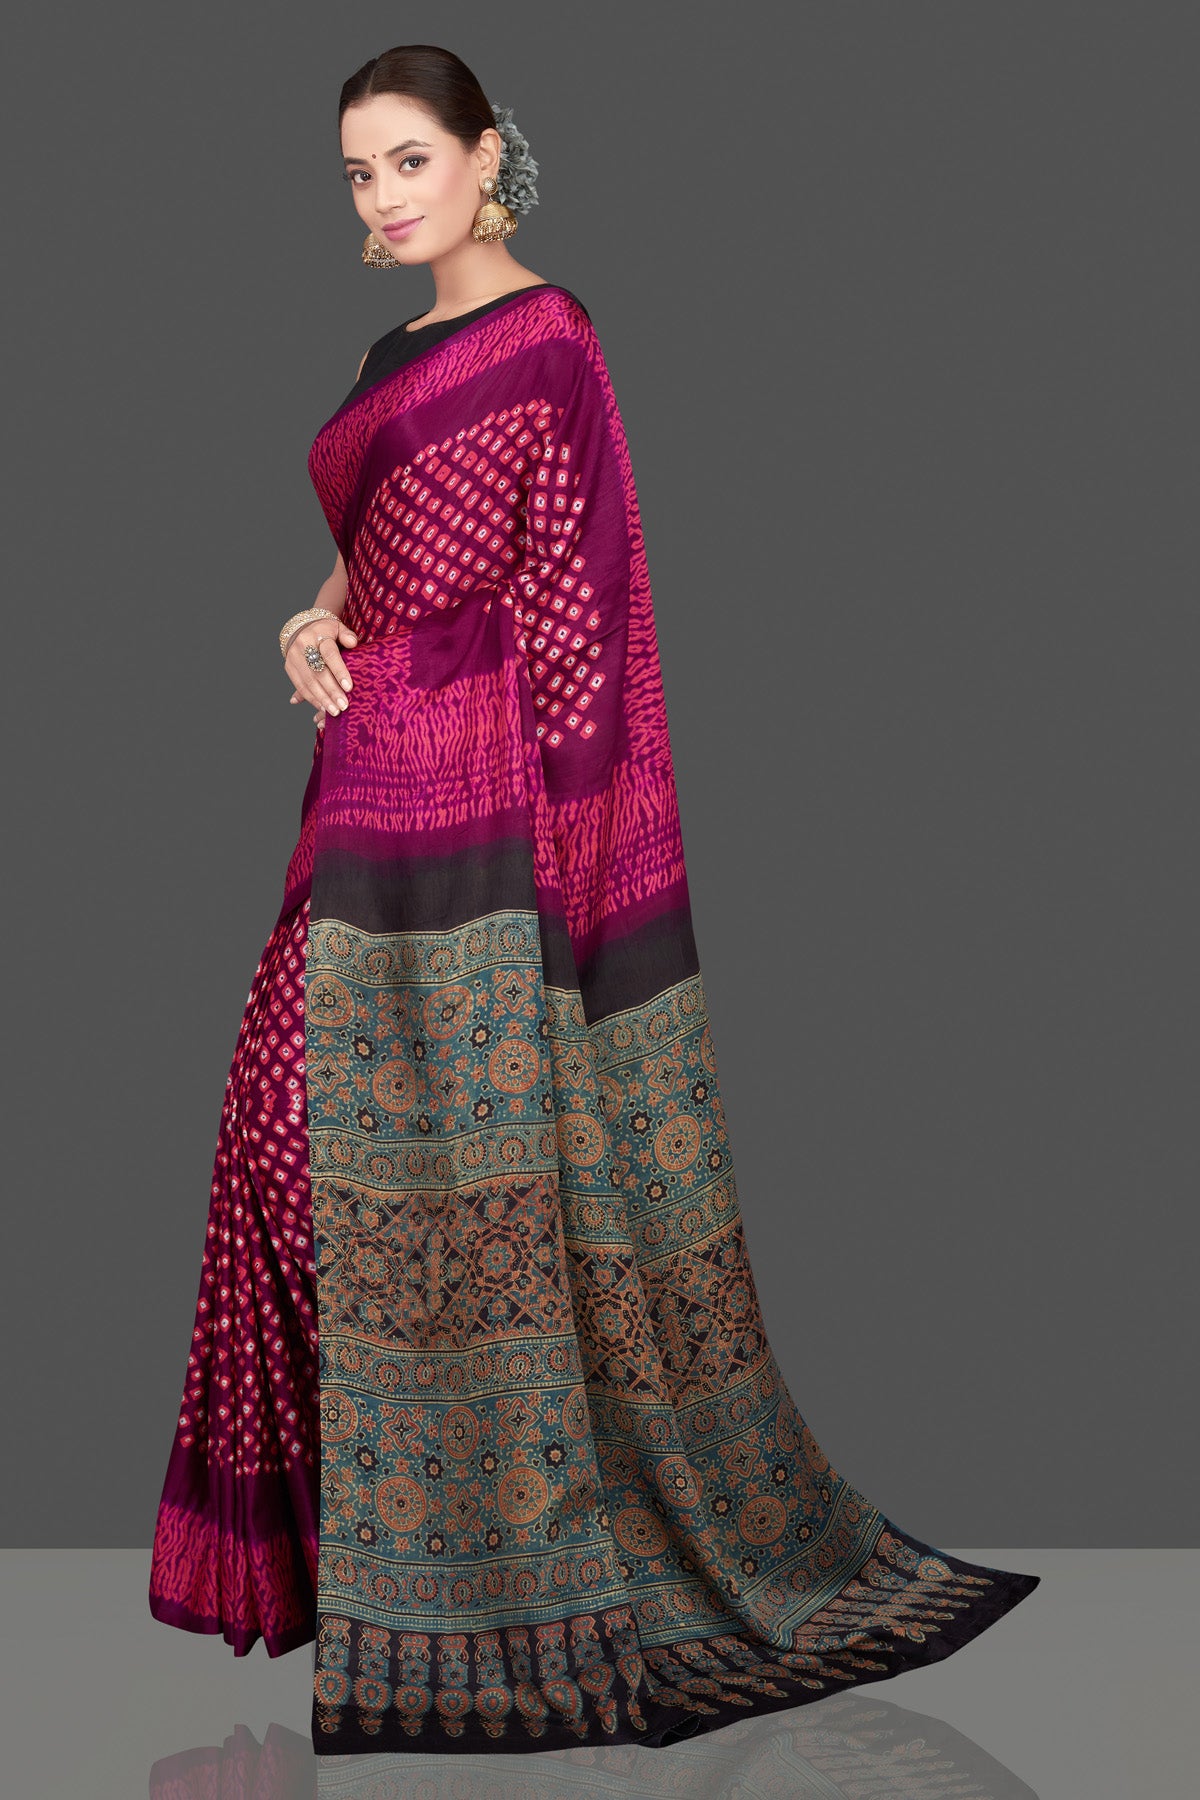 Buy magenta and pink printed gajji silk sari online in USA with Ajrakh pallu. Choose from a stunning range of designer sarees, printed sarees, handwoven saris, embroidered sarees for special occasions from Pure Elegance Indian saree store in USA.-pallu